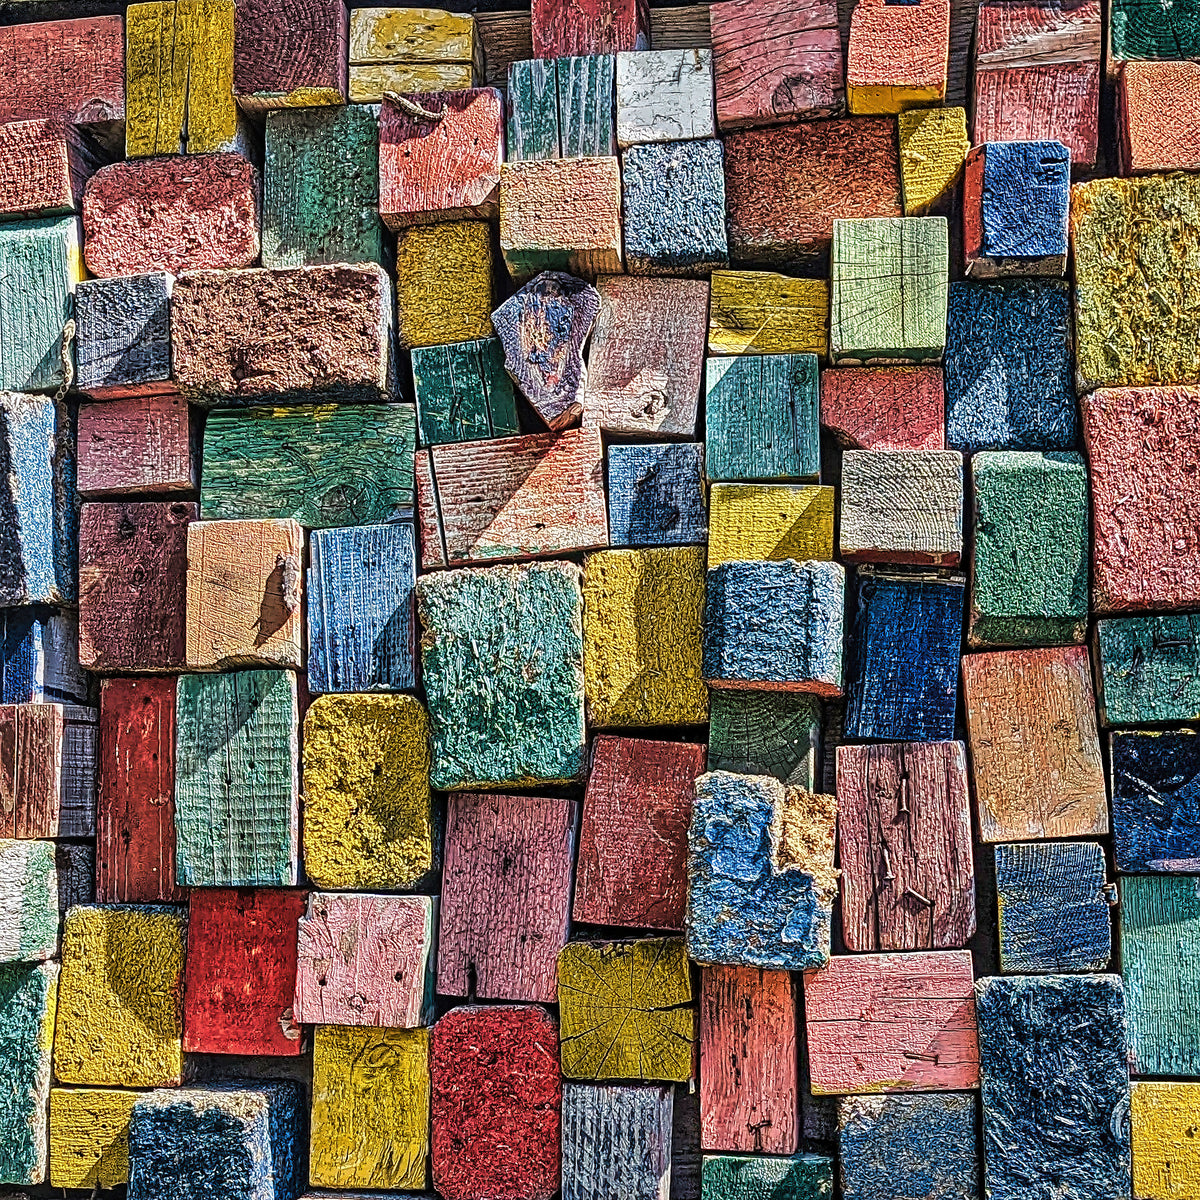 Vibrant Distressed Wood Blocks - A Rustic Charm Captured in Photography by Le Boulanger